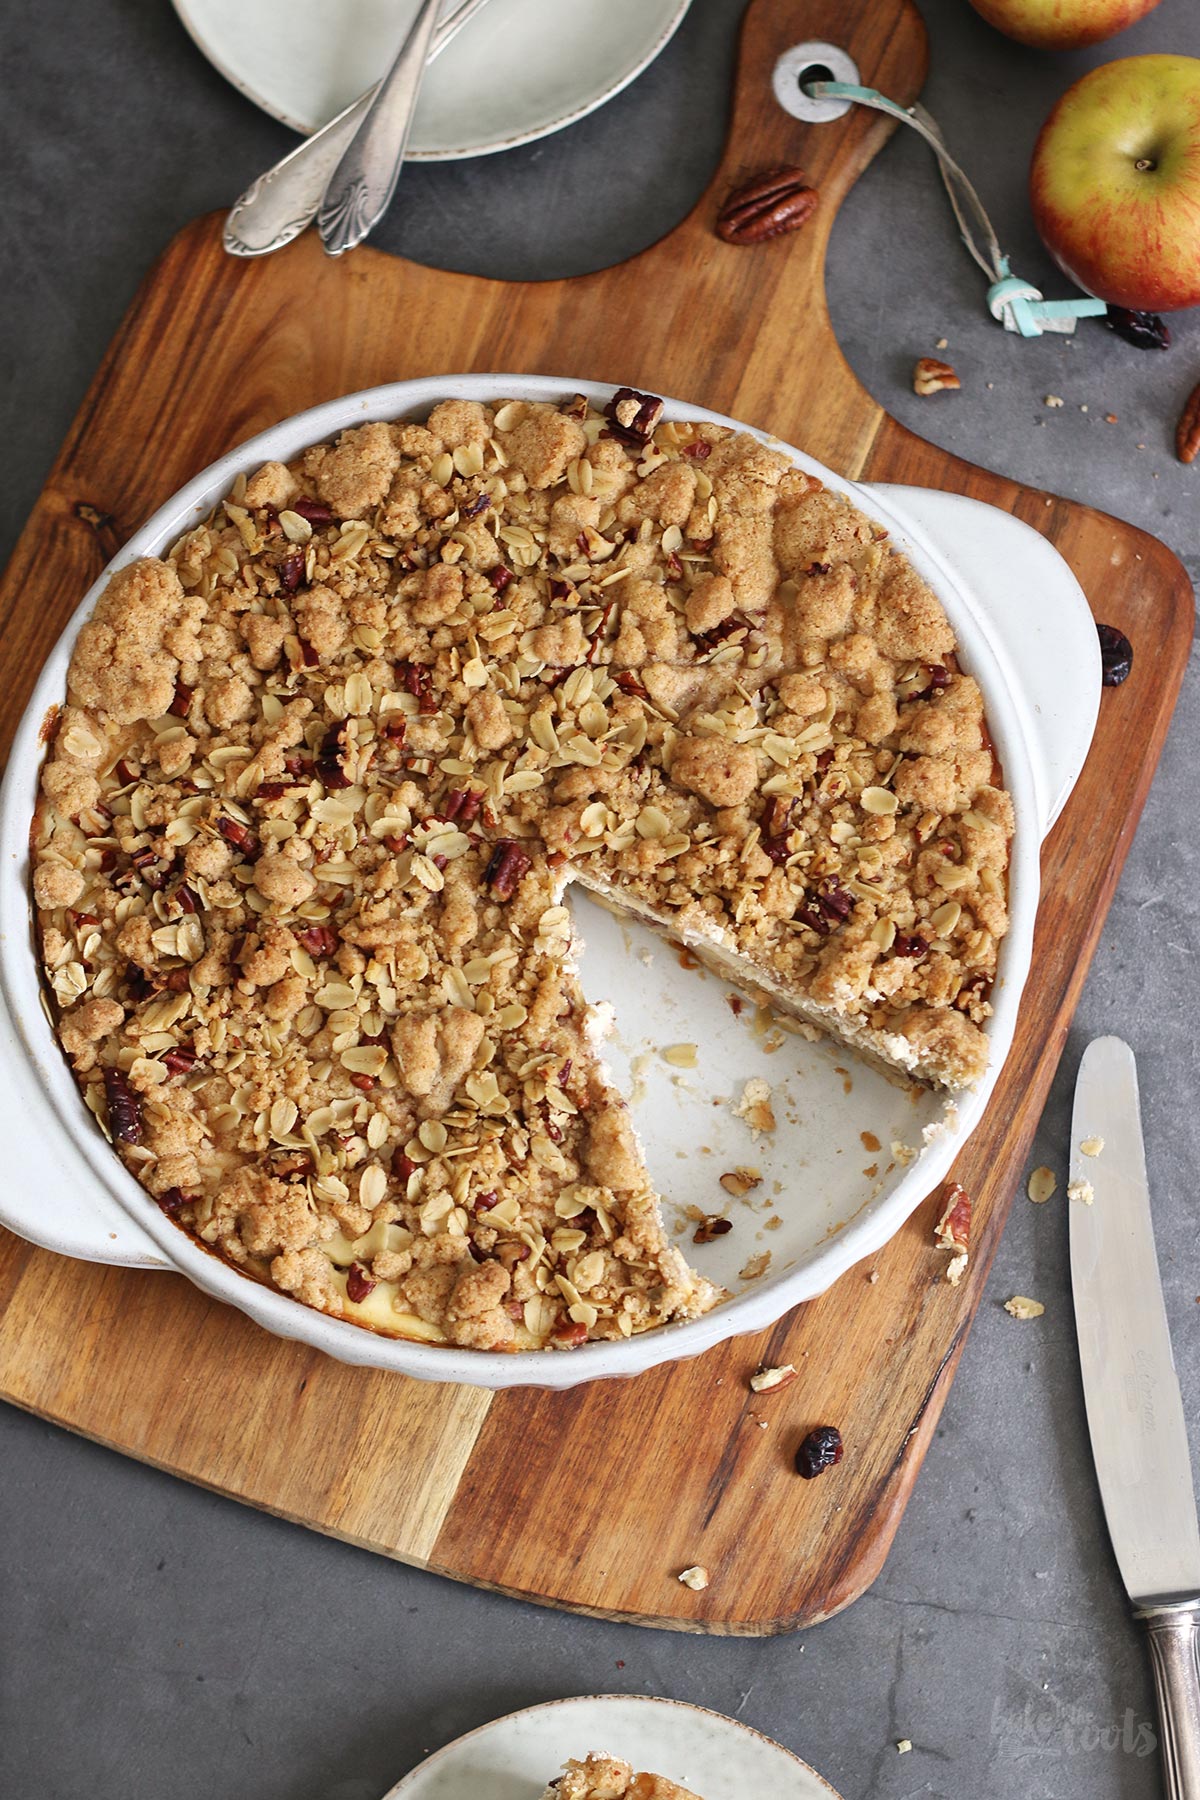 Apple Pecan Cranberry Streusel Cake | Bake to the roots